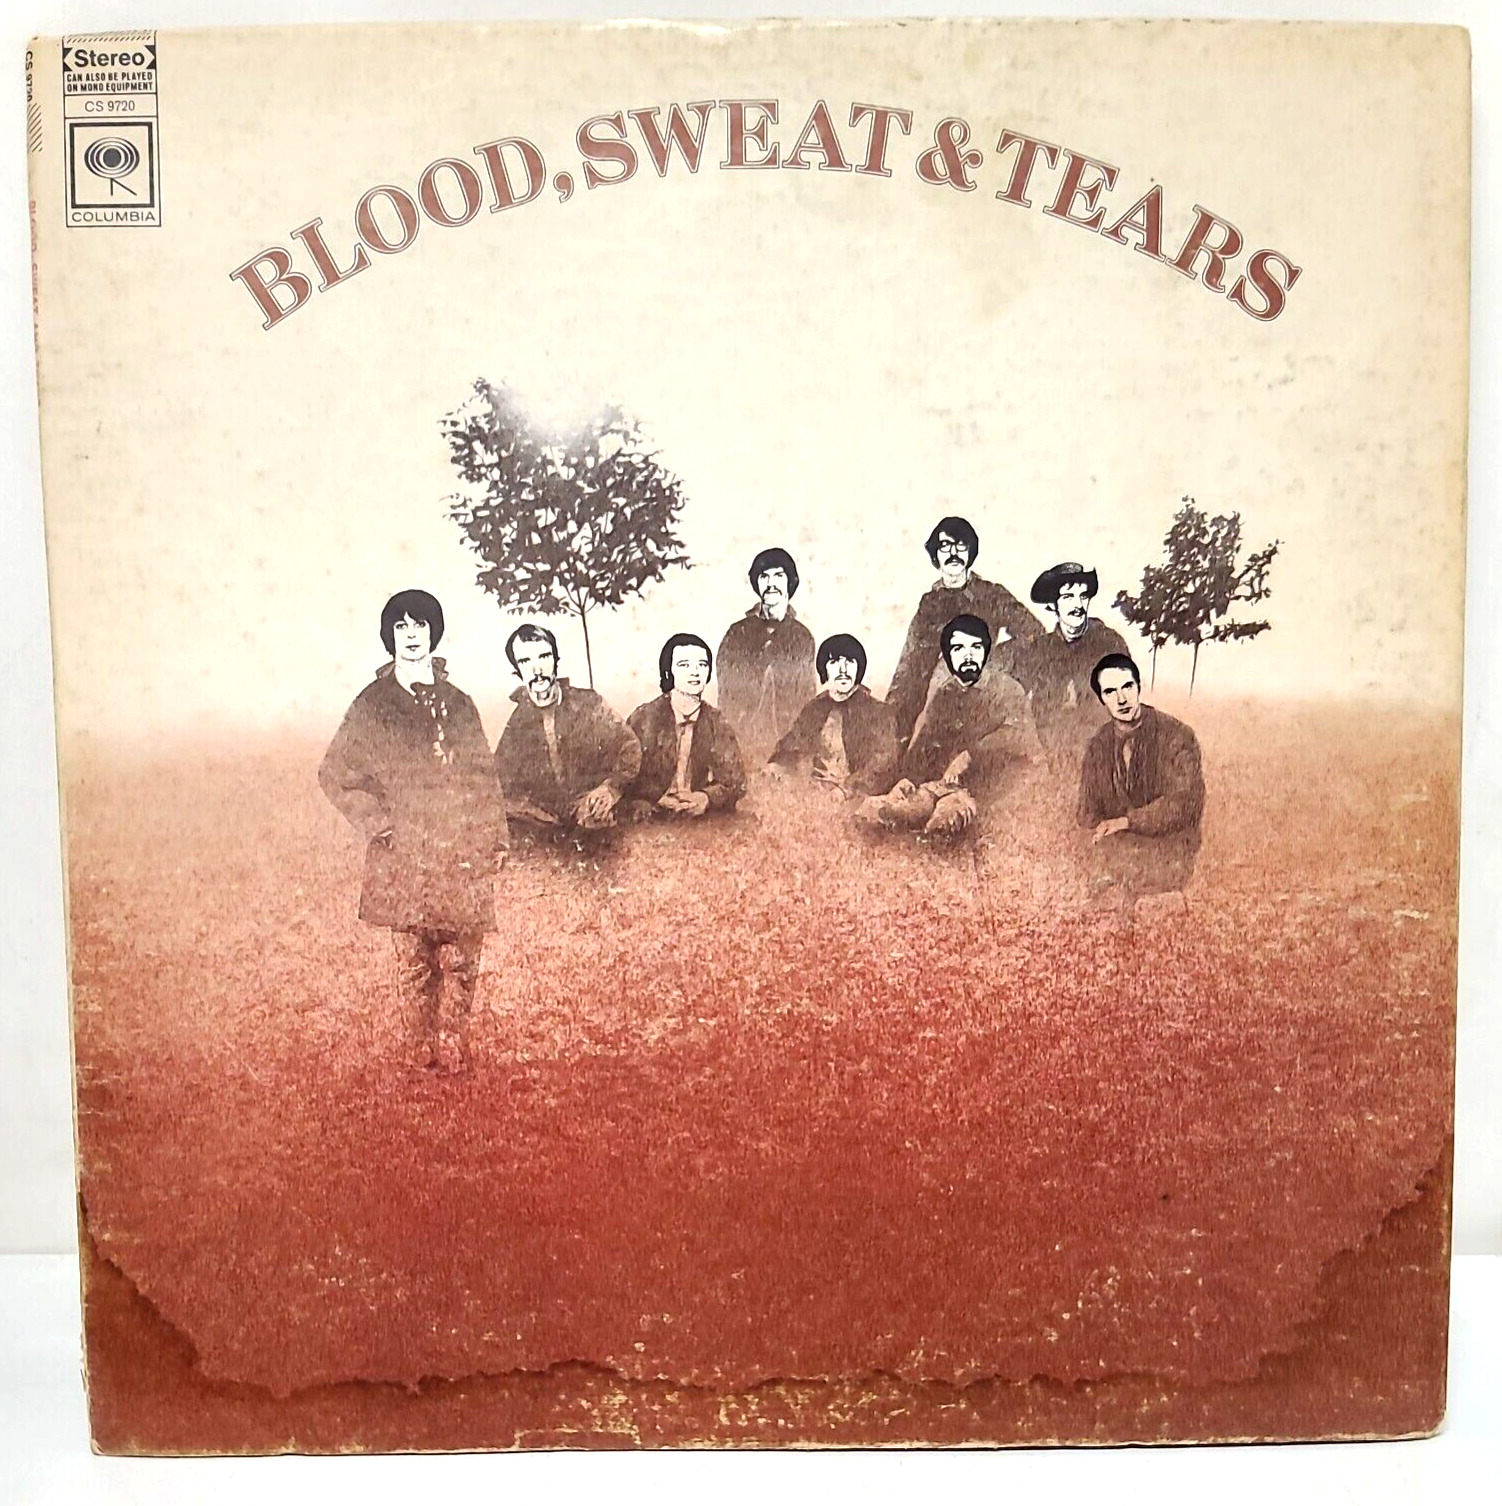 Blood Sweat & Tears Self Titled Columbia Stereo CS9720 Vtg 60s Record LP 1968 12